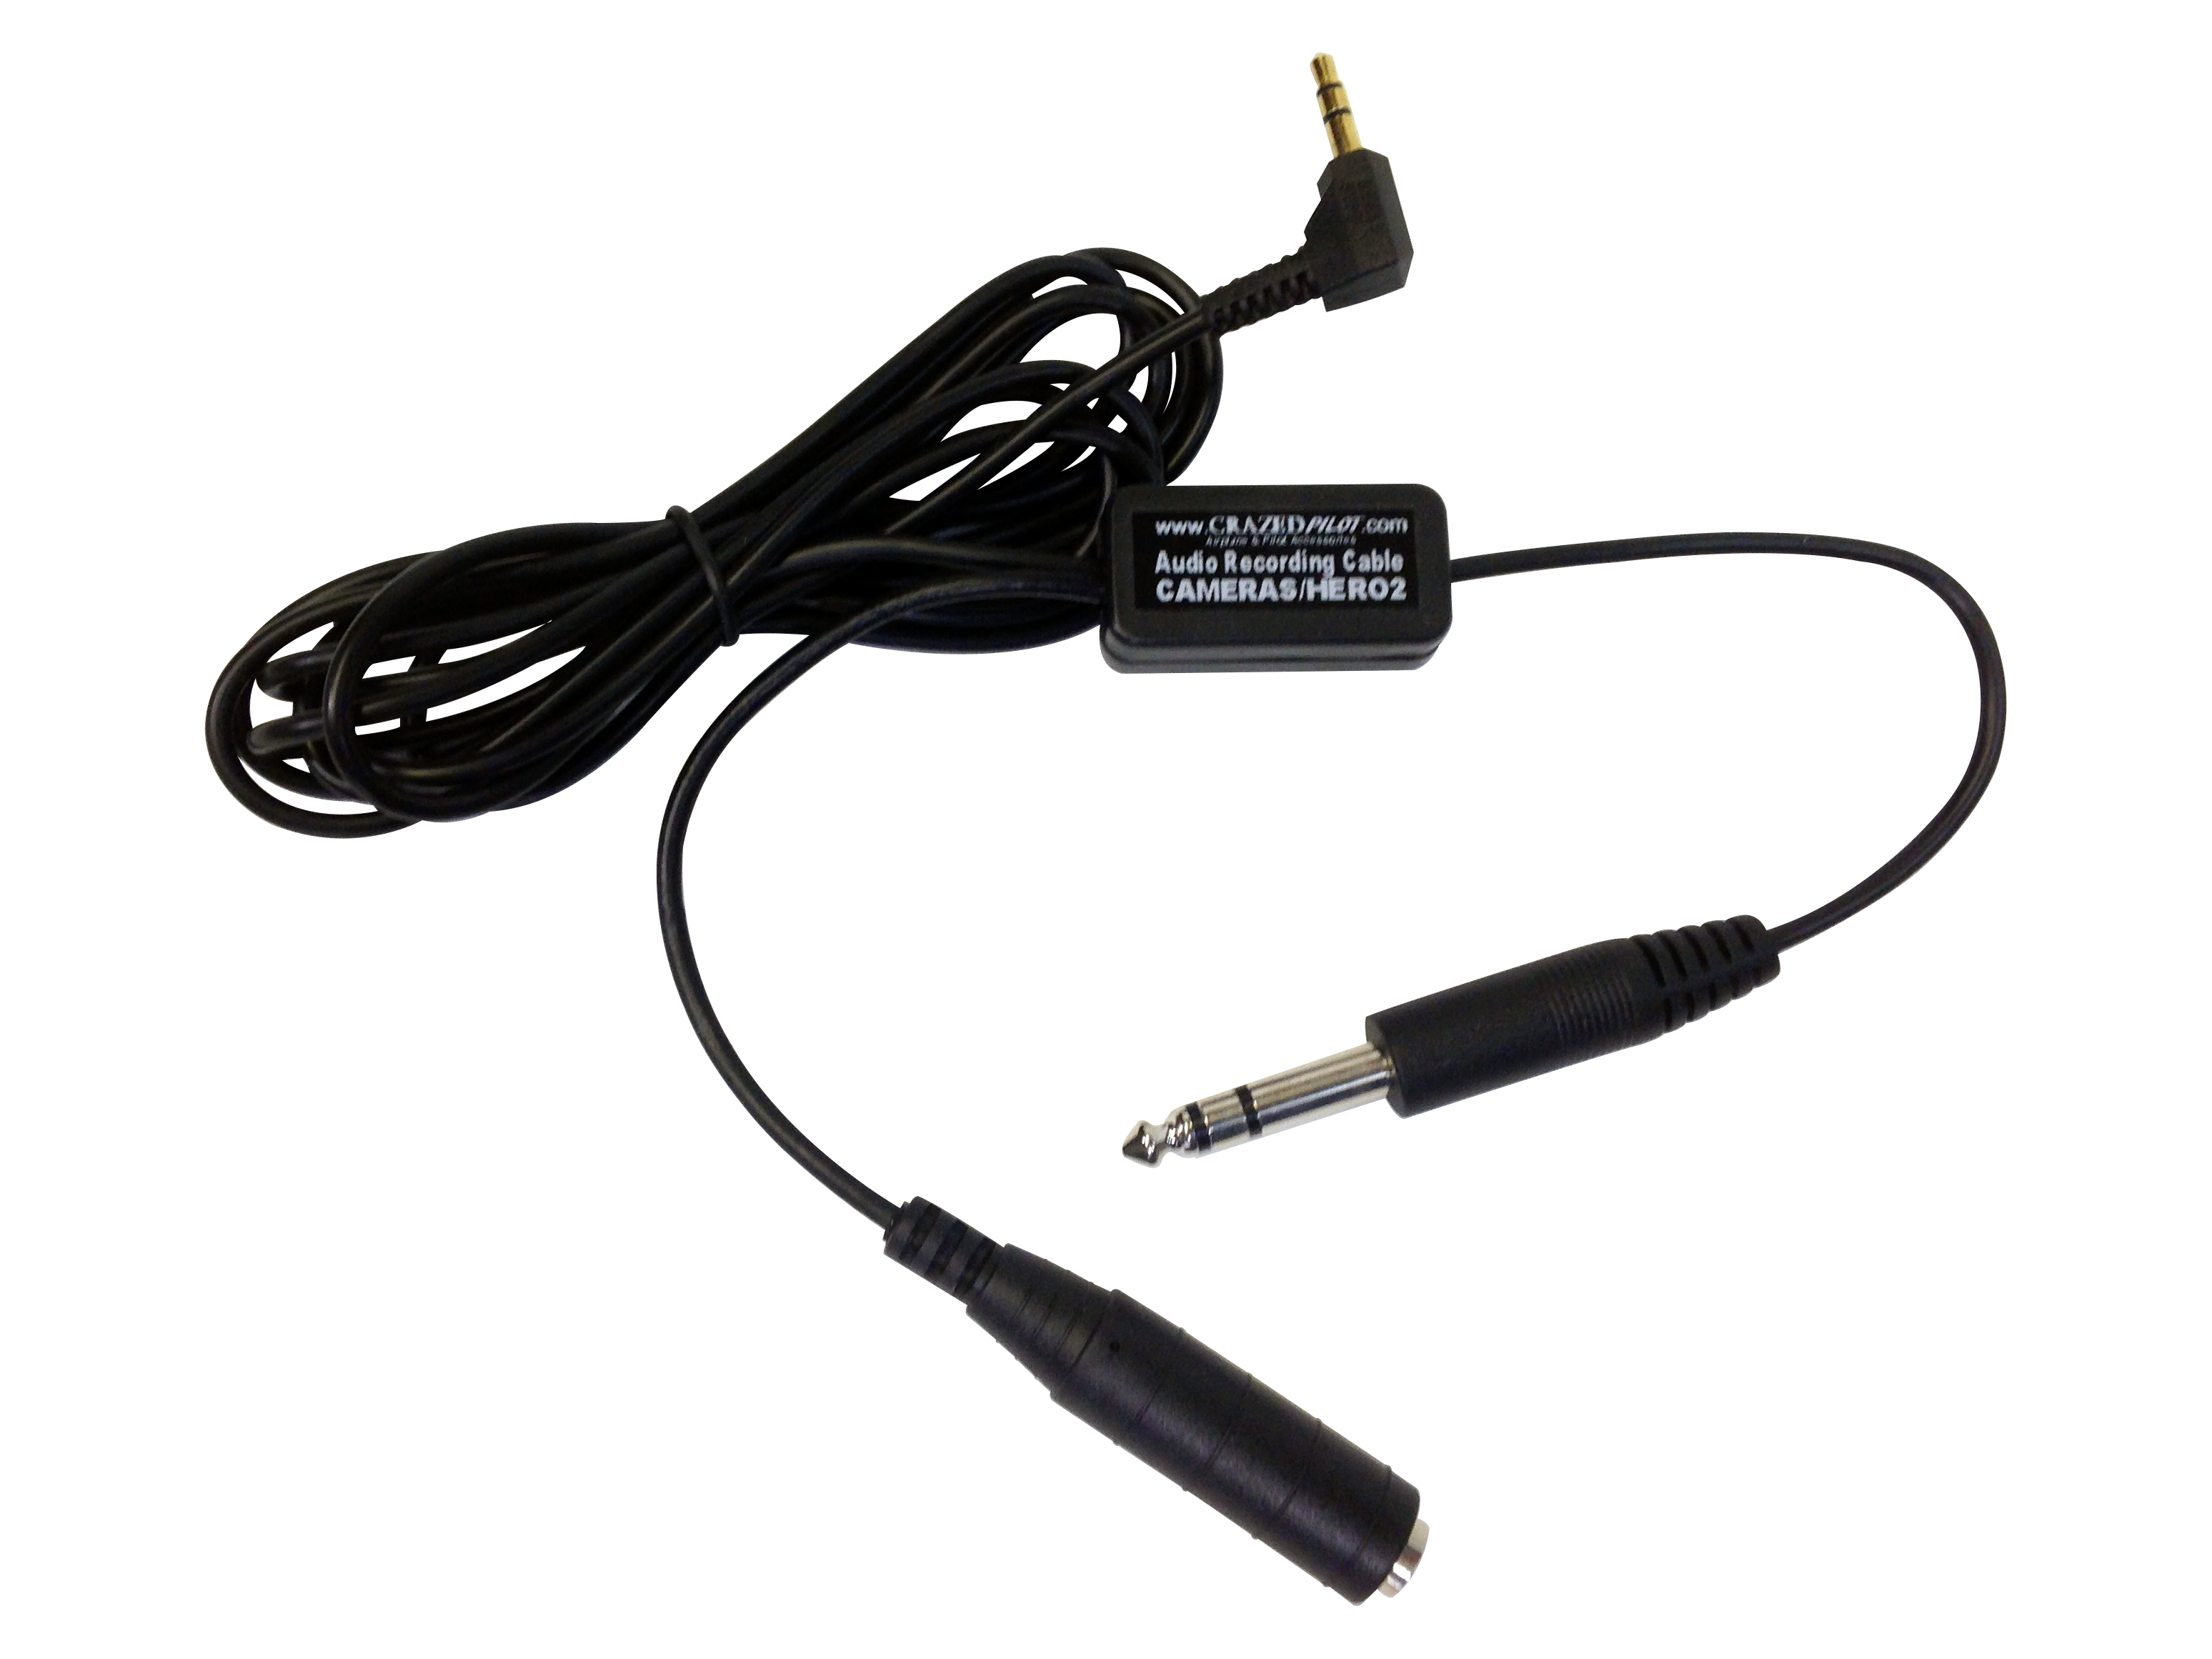 CRAZEDpilot Hero2 and Cams cable